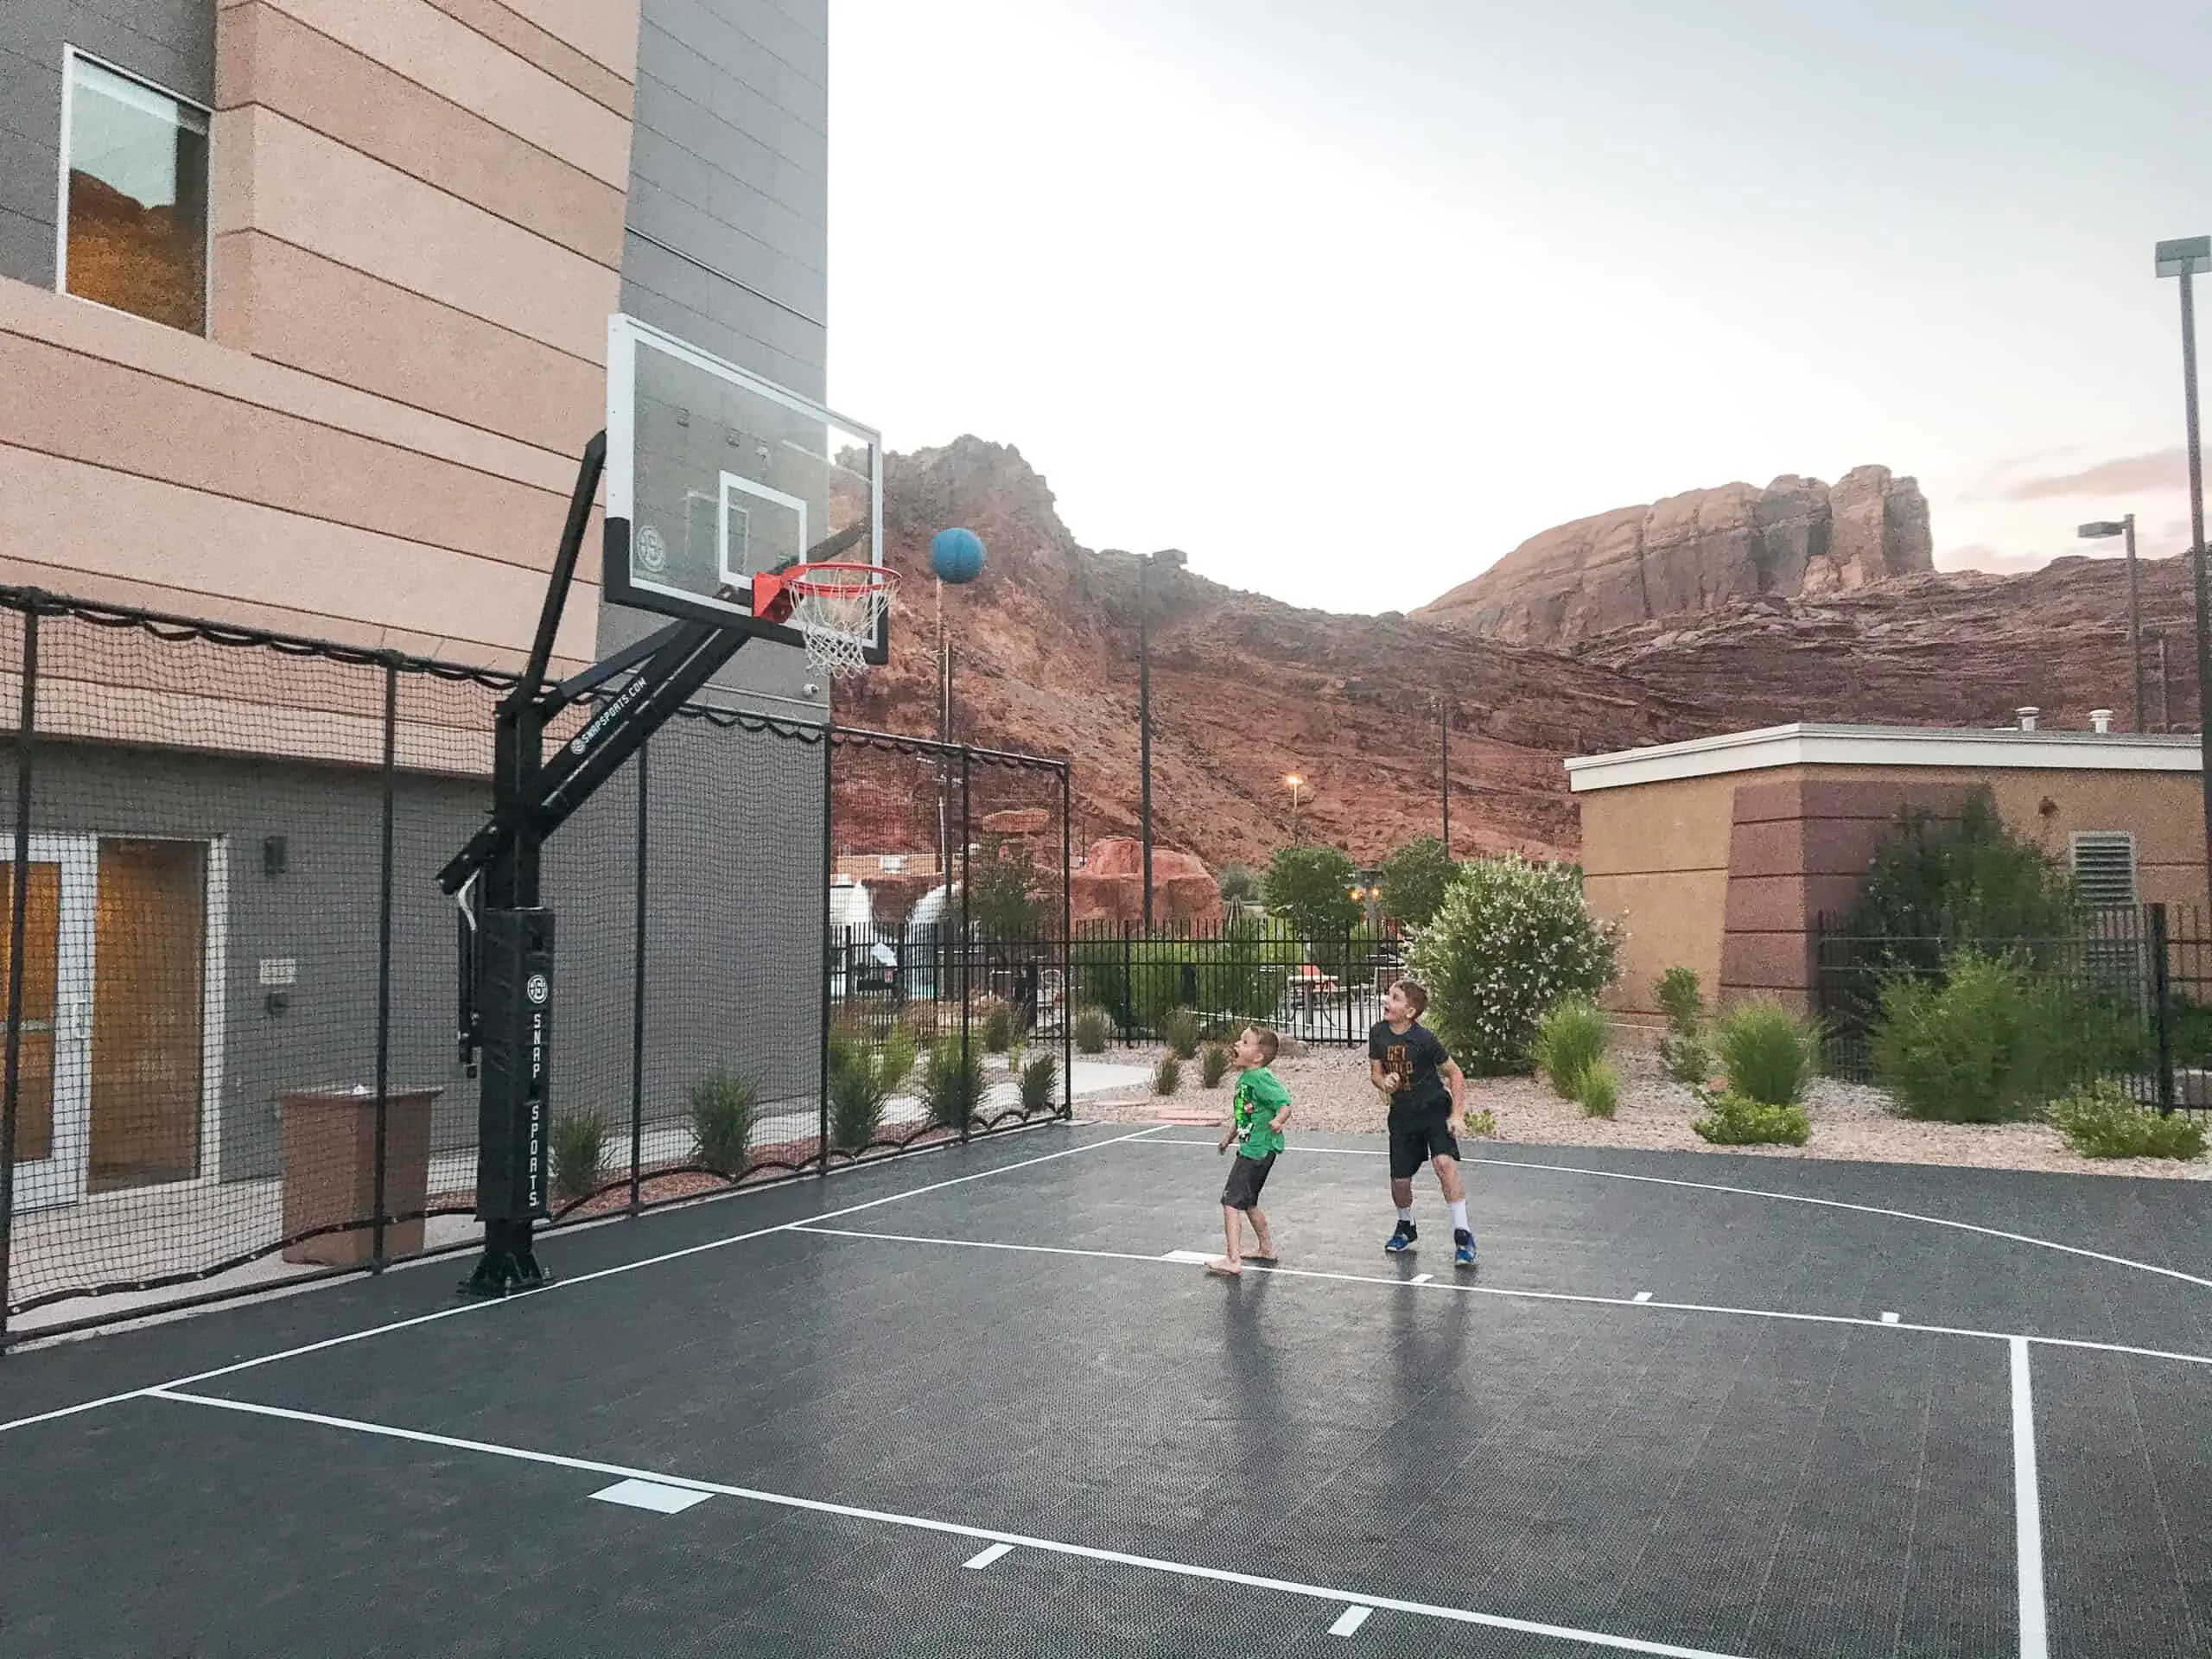 Basketball Court at Springhill Suites in Moab, Utah